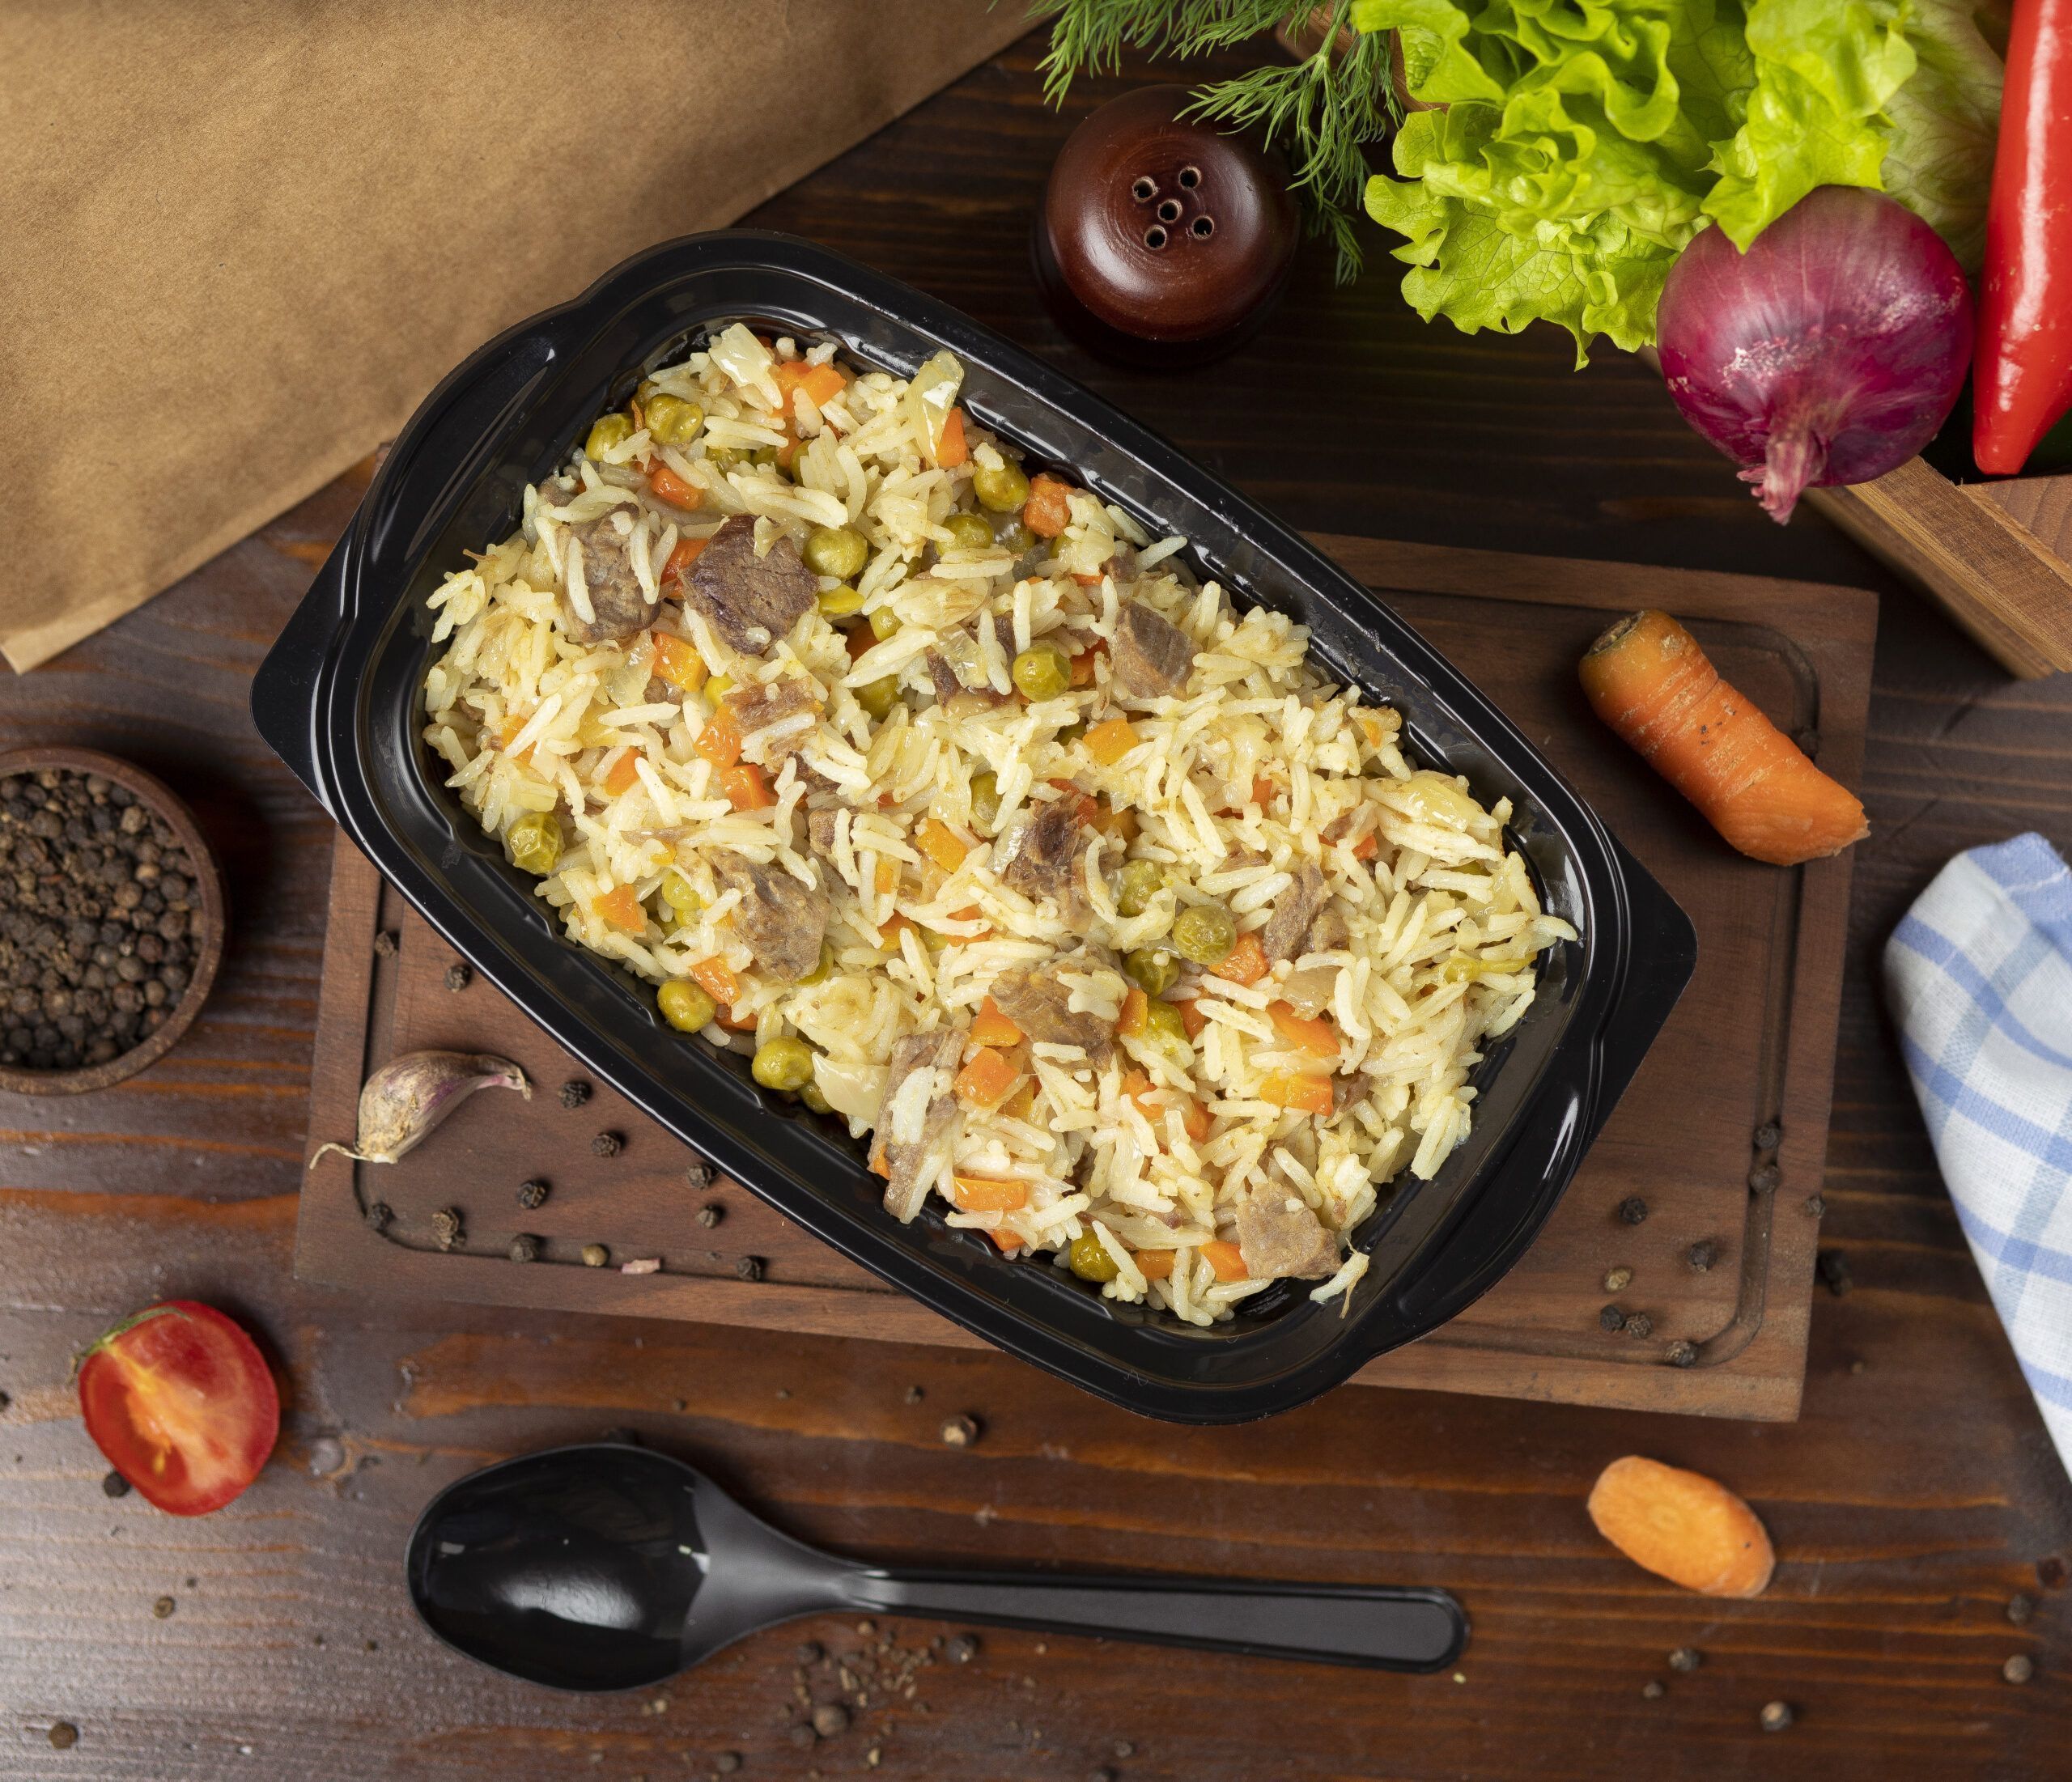 plov rice garnish with vegetables carrots chestnuts and beef pieces scaled